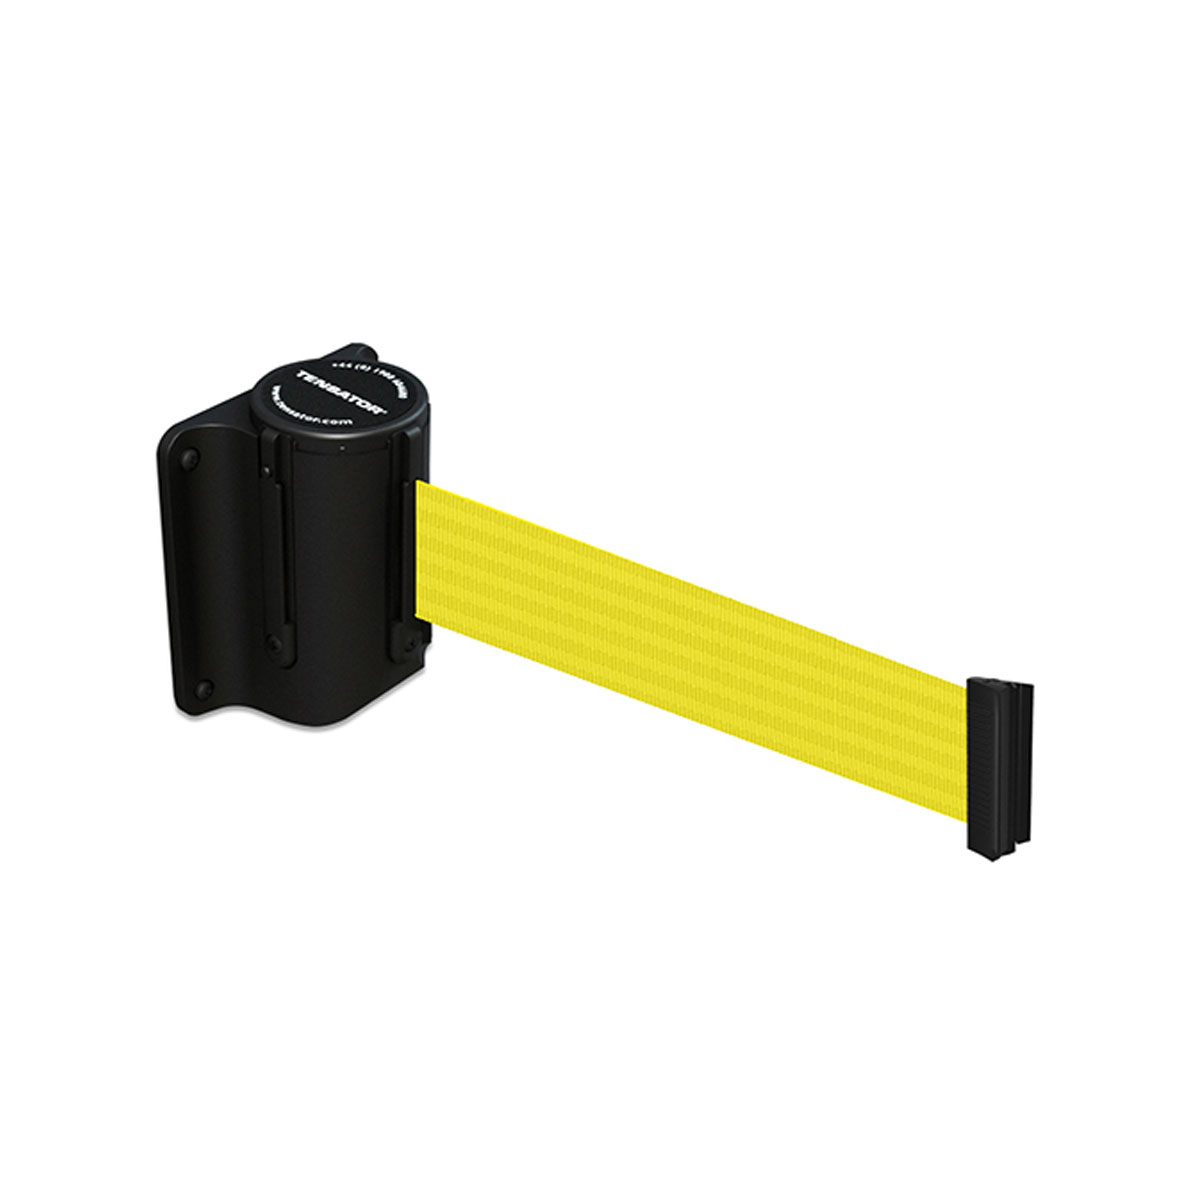 Tensabarrier® Mini Wall Mounted Retracting Barrier Is Supplied With Wall Receiver Clip as Standard